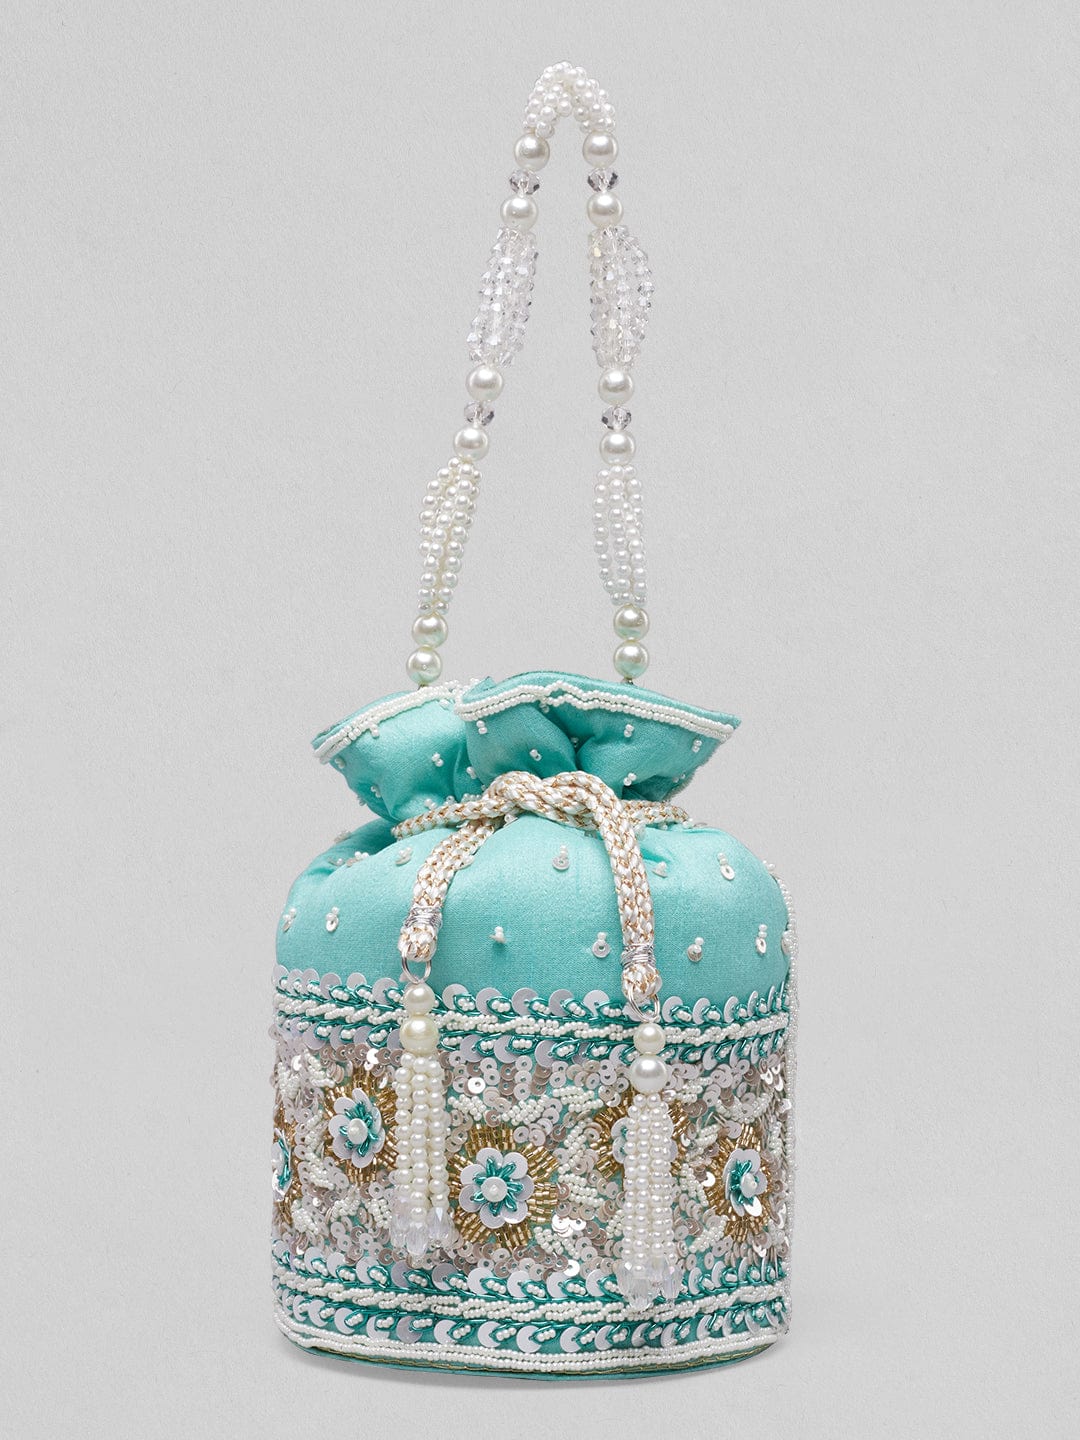 Rubans Mint Coloured Potli Bag With Golden And White Embroided Design. Handbag & Wallet Accessories